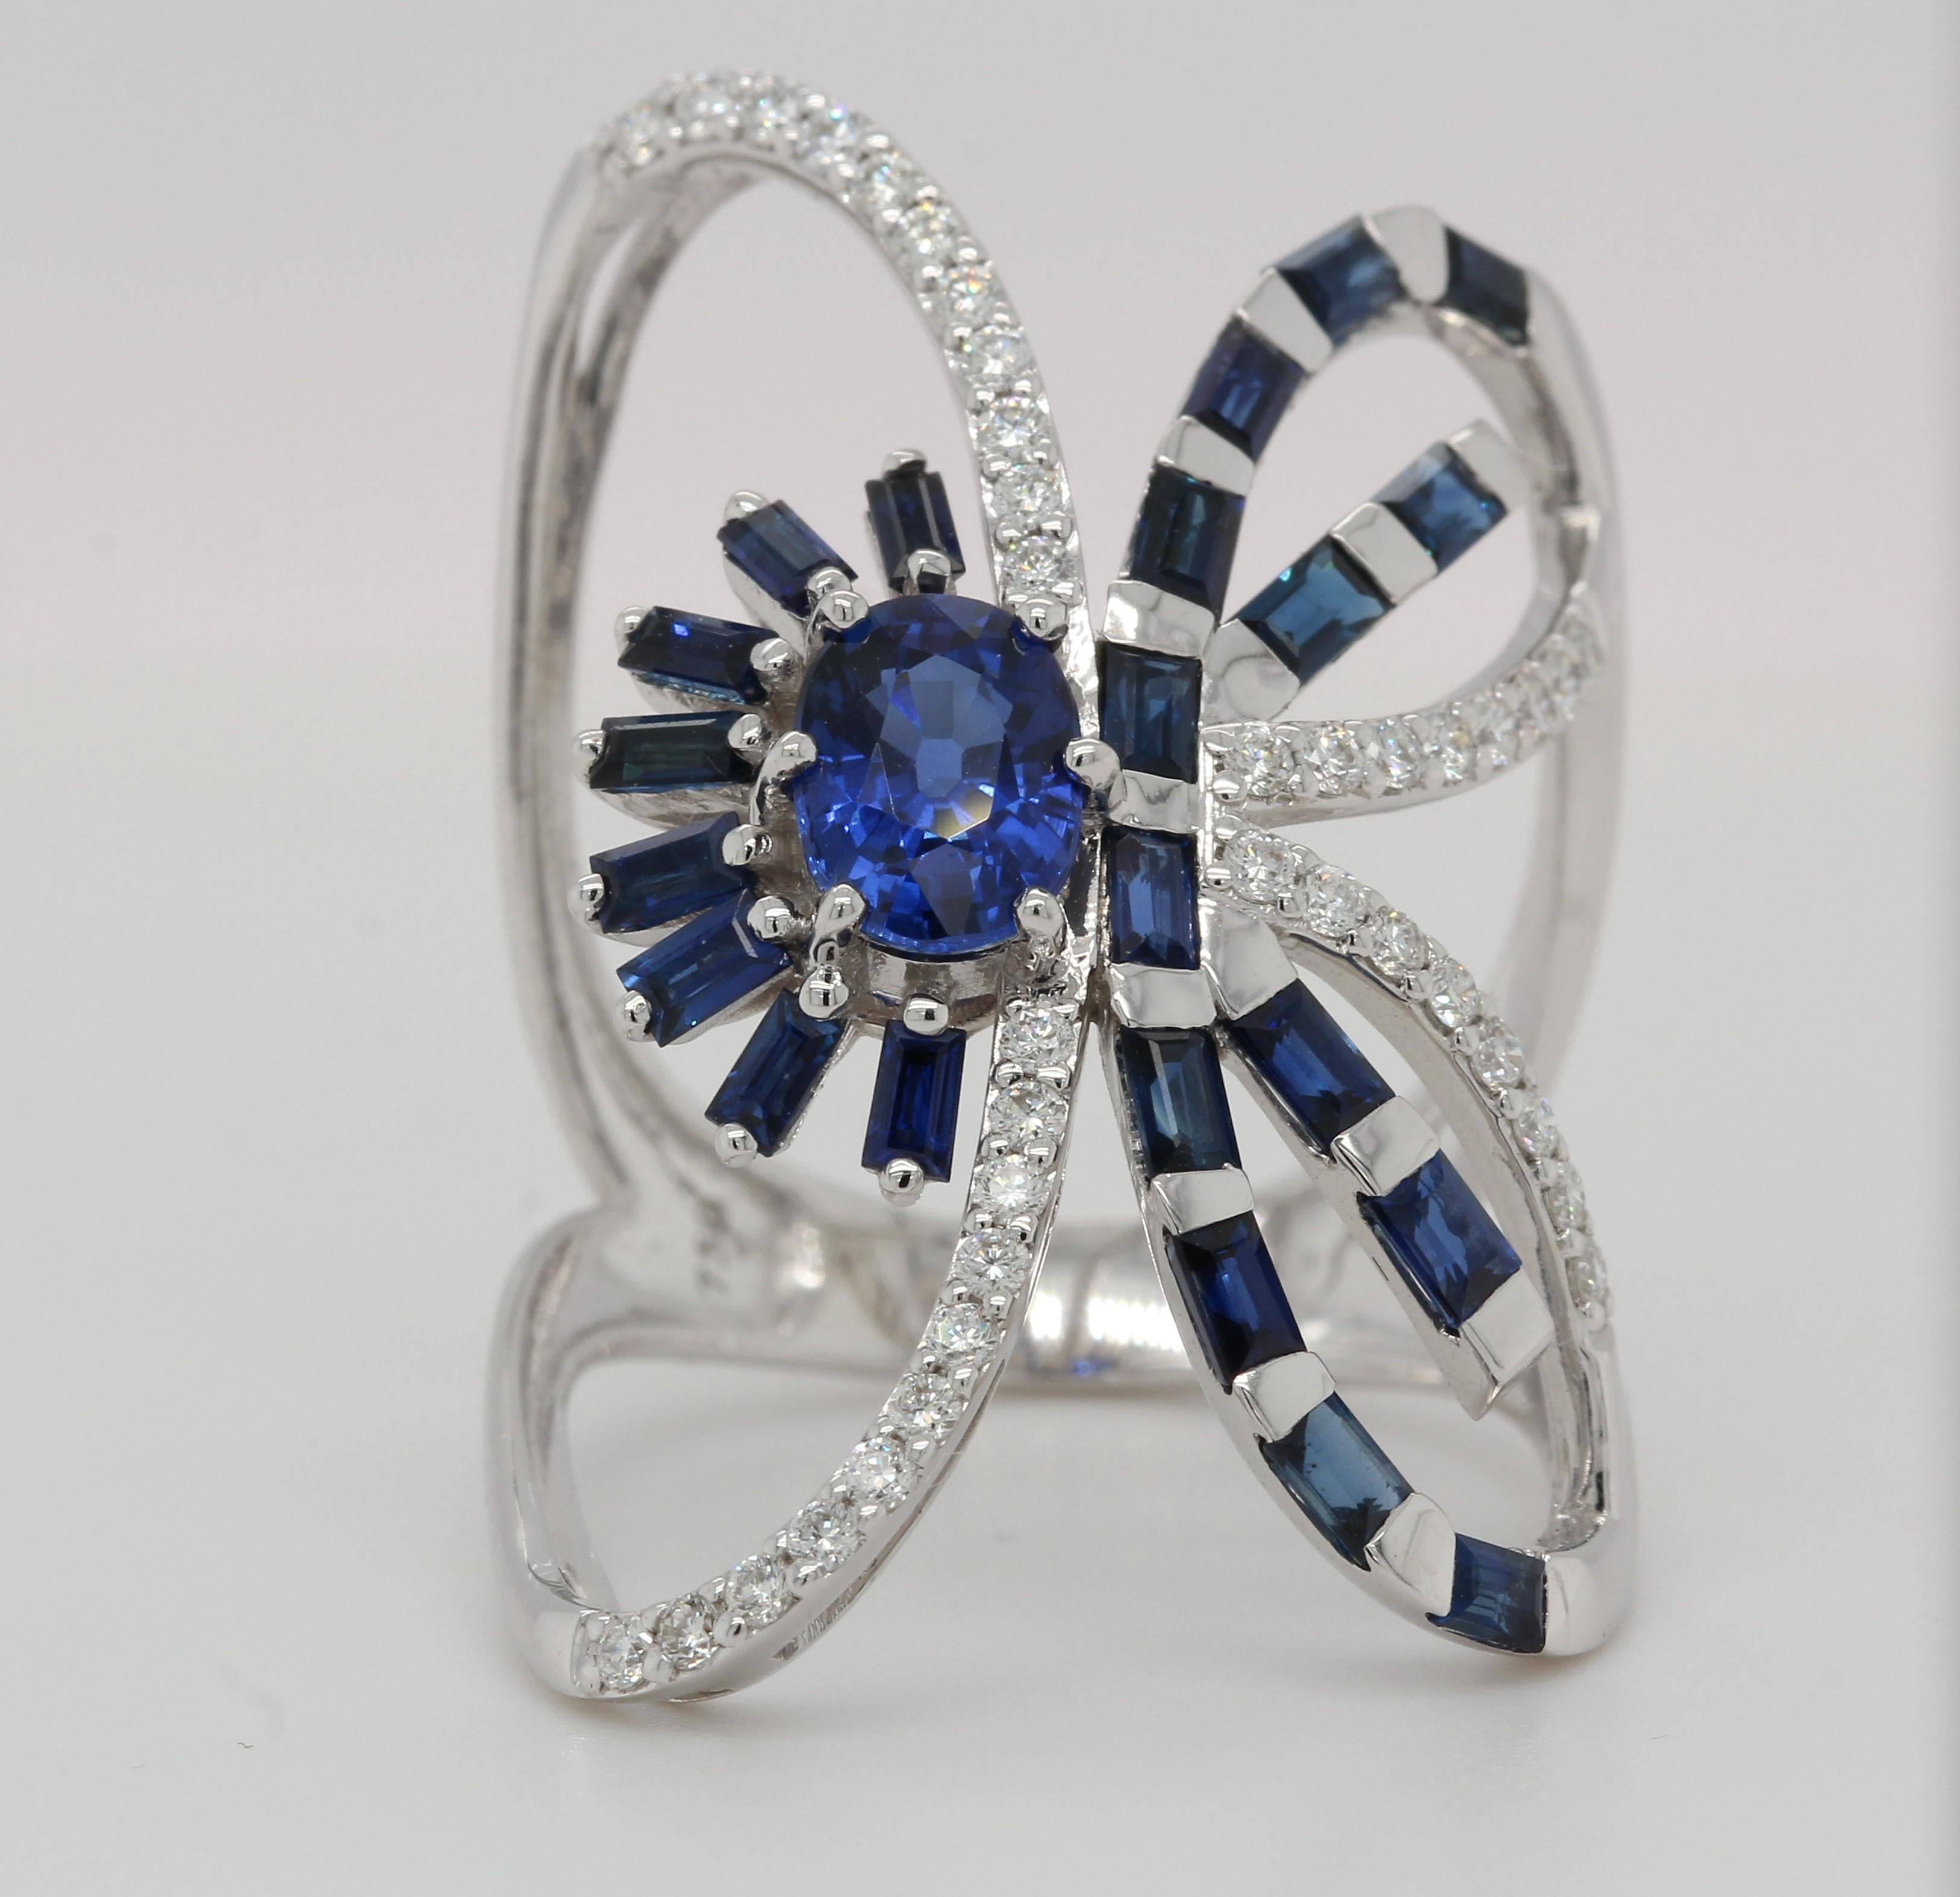 A gorgeous sapphire and diamond butterfly ring in 18K gold. This stunning 18K white gold sapphire and diamond butterfly ring will give your look a glamorous update. The blue sapphire is so eye-catching, it will make any outfit pop! You can also add